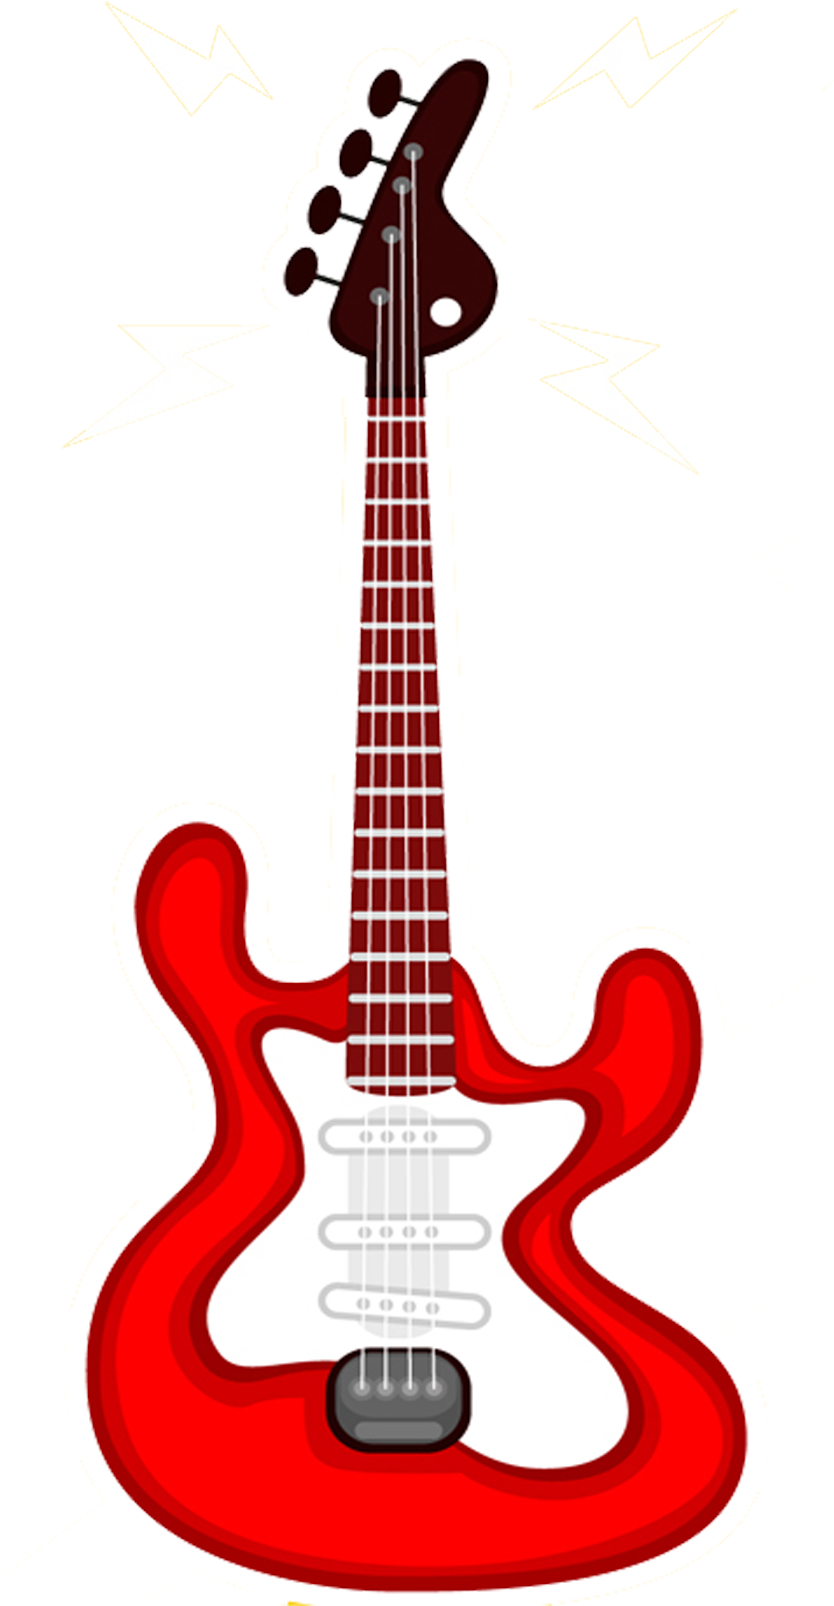 Electric Guitar Drawing Poster Music - Electric Guitar Drawing Poster Music (2362x2362)